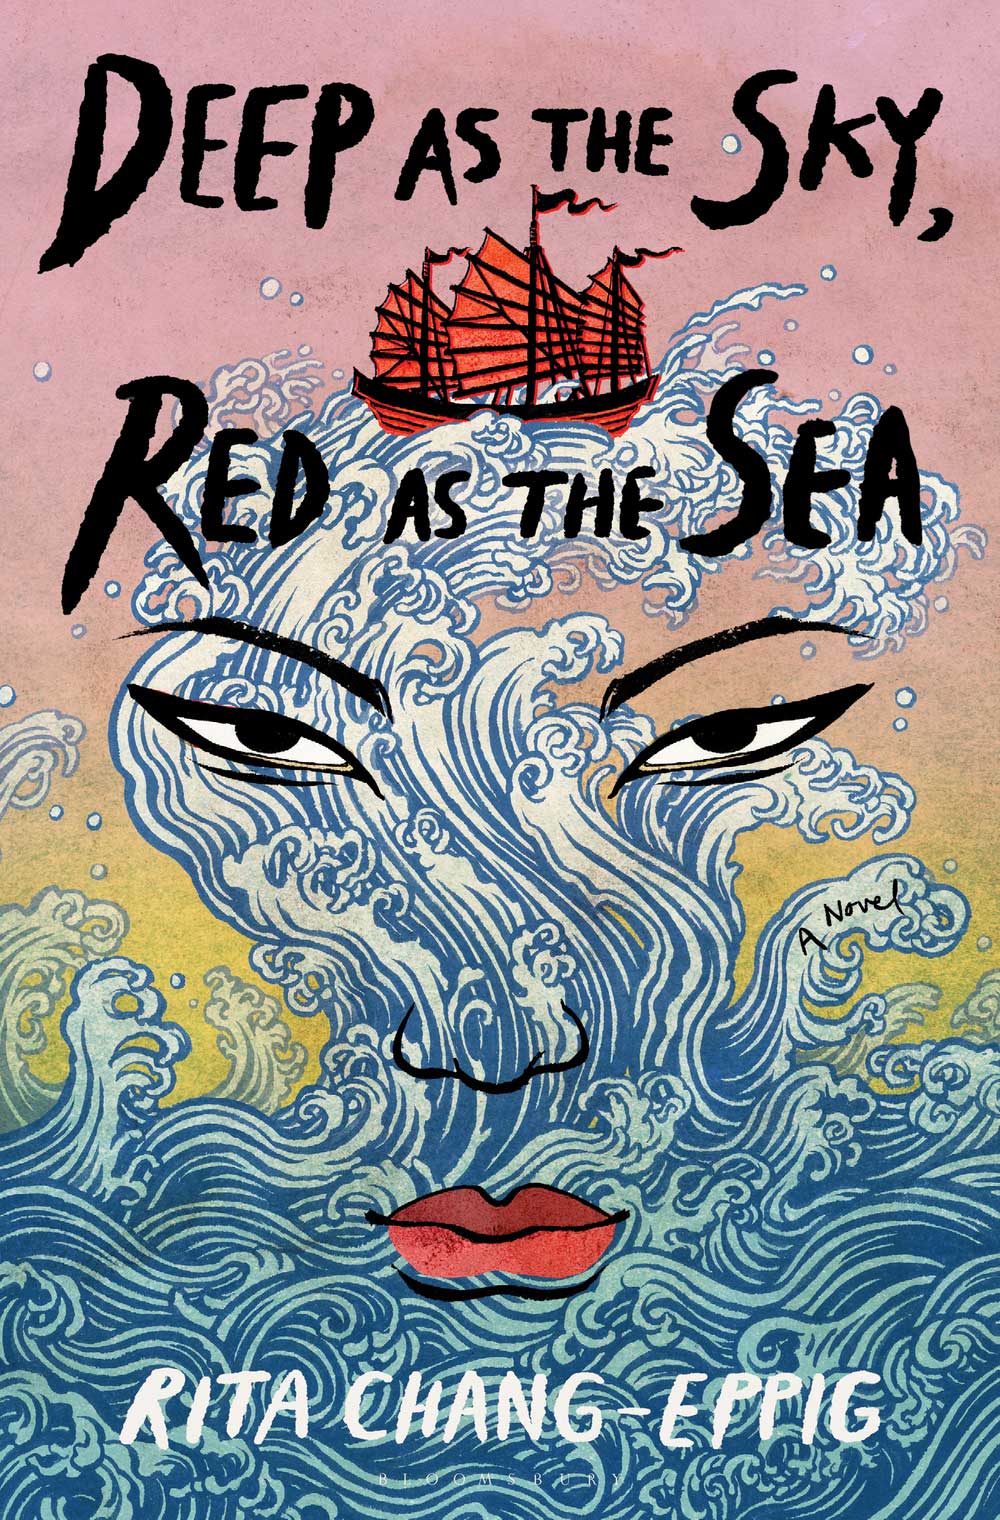 Book cover of Deep as the Sky, Red as the Sea. Illustration of a ship on top of a tidal wave.